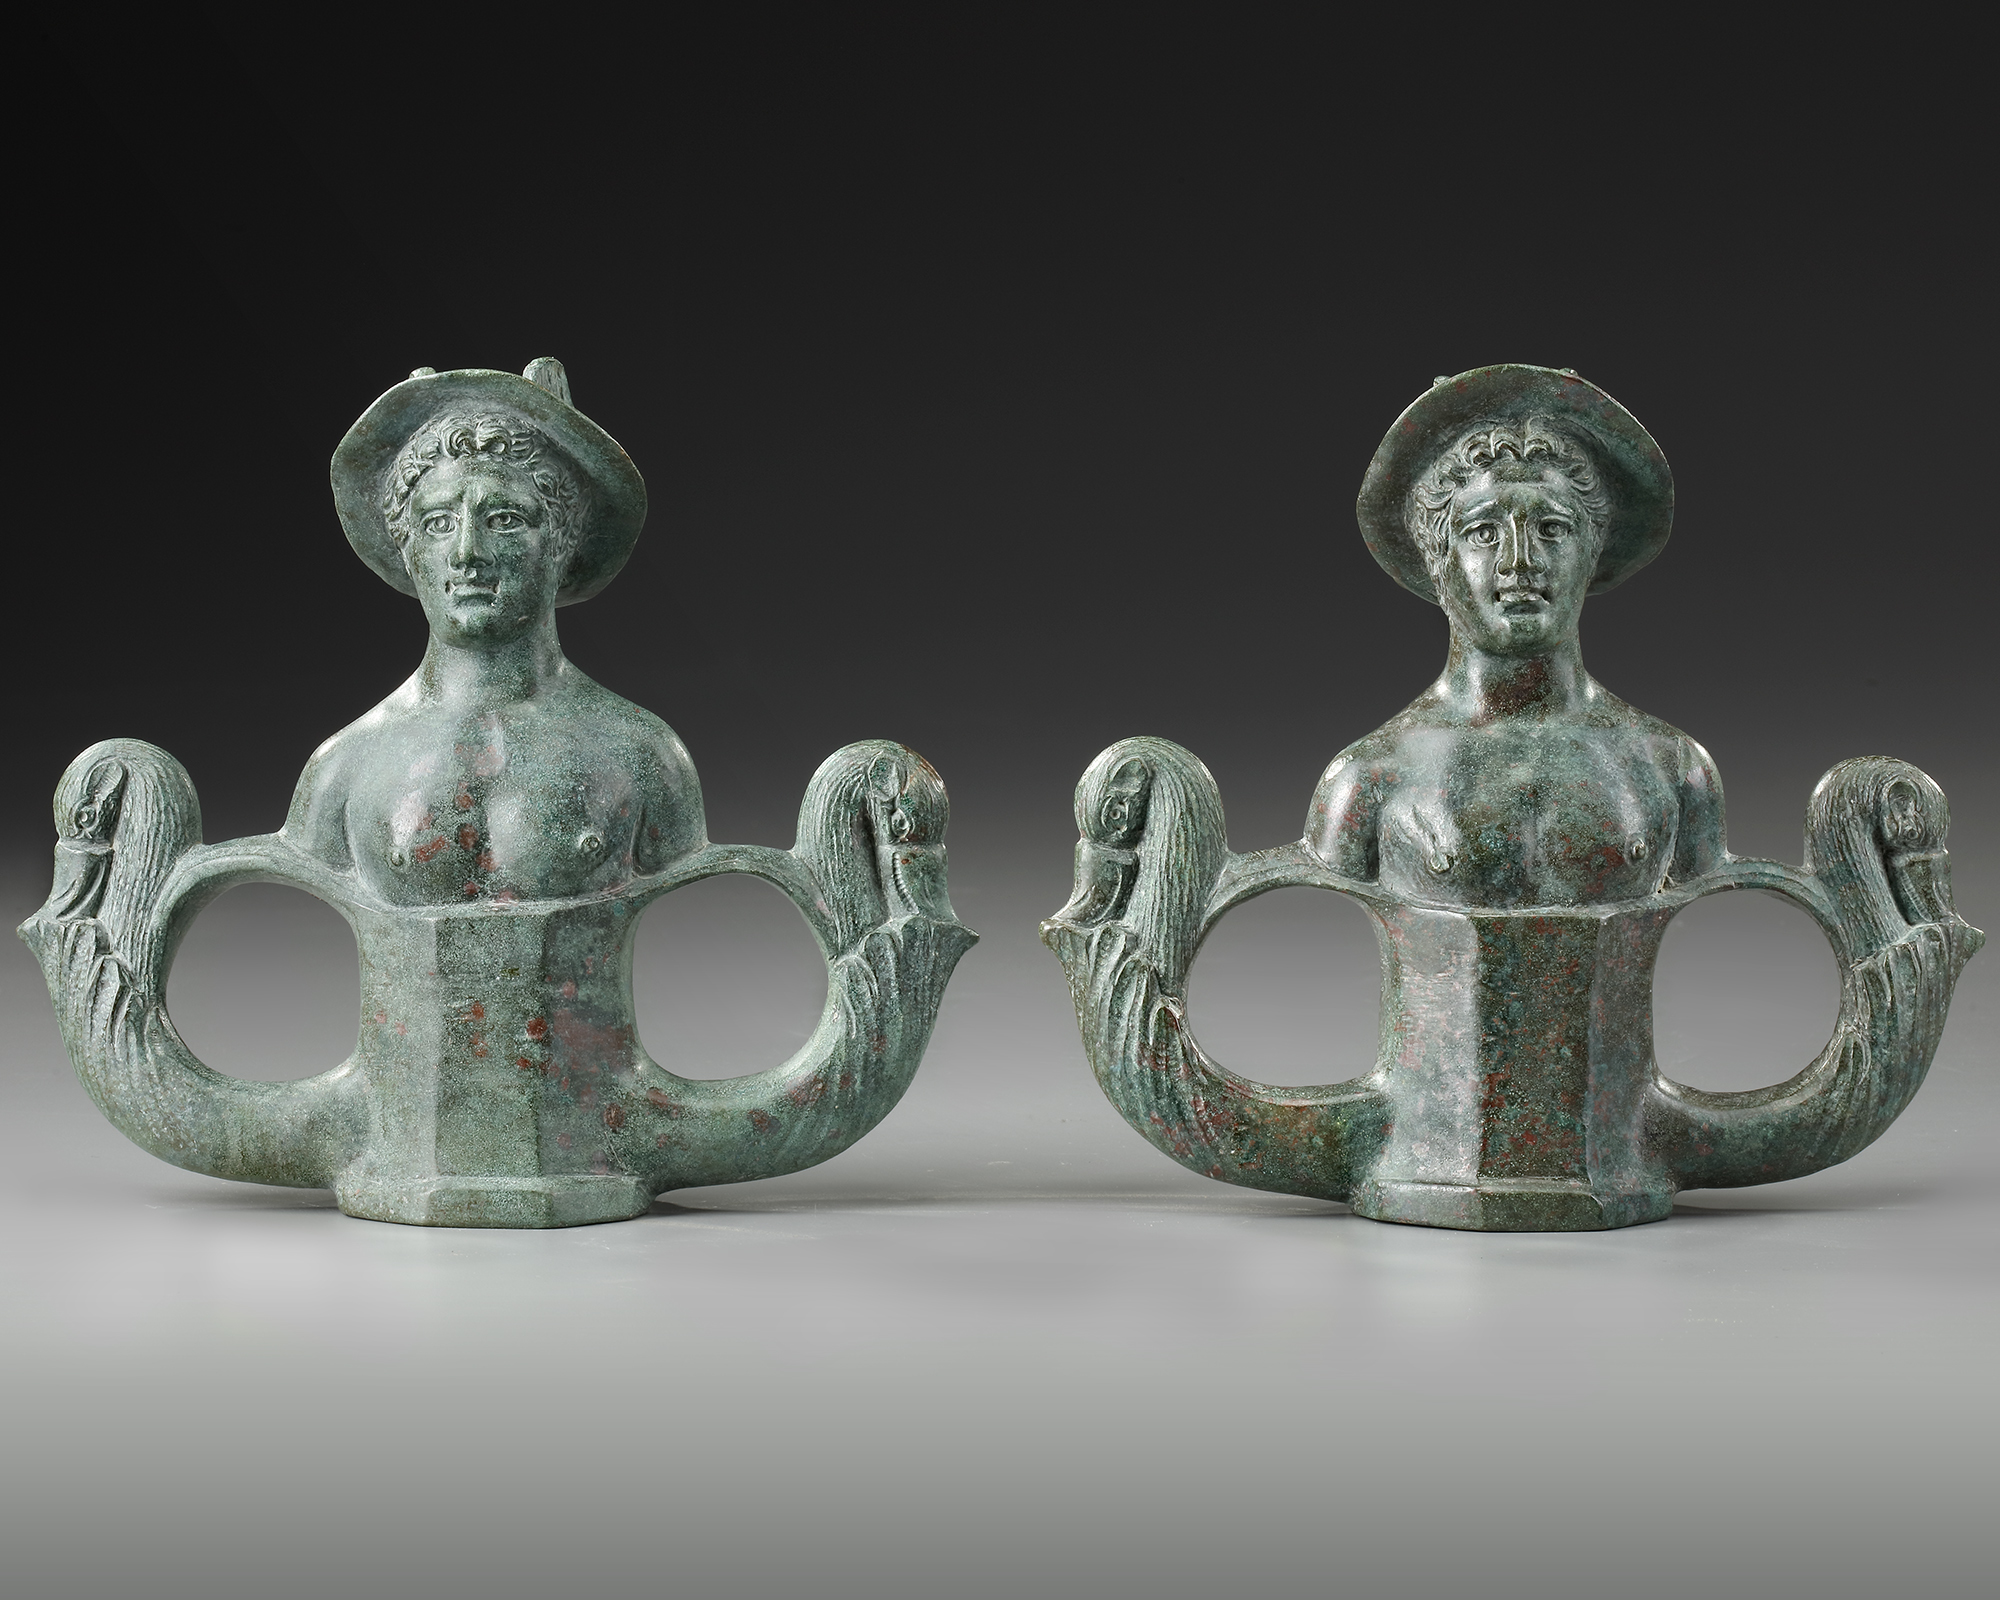 A PAIR OF ROMAN BRONZE CHARIOT FITTING, CIRCA 1ST- 2ND CENTURY A.D.